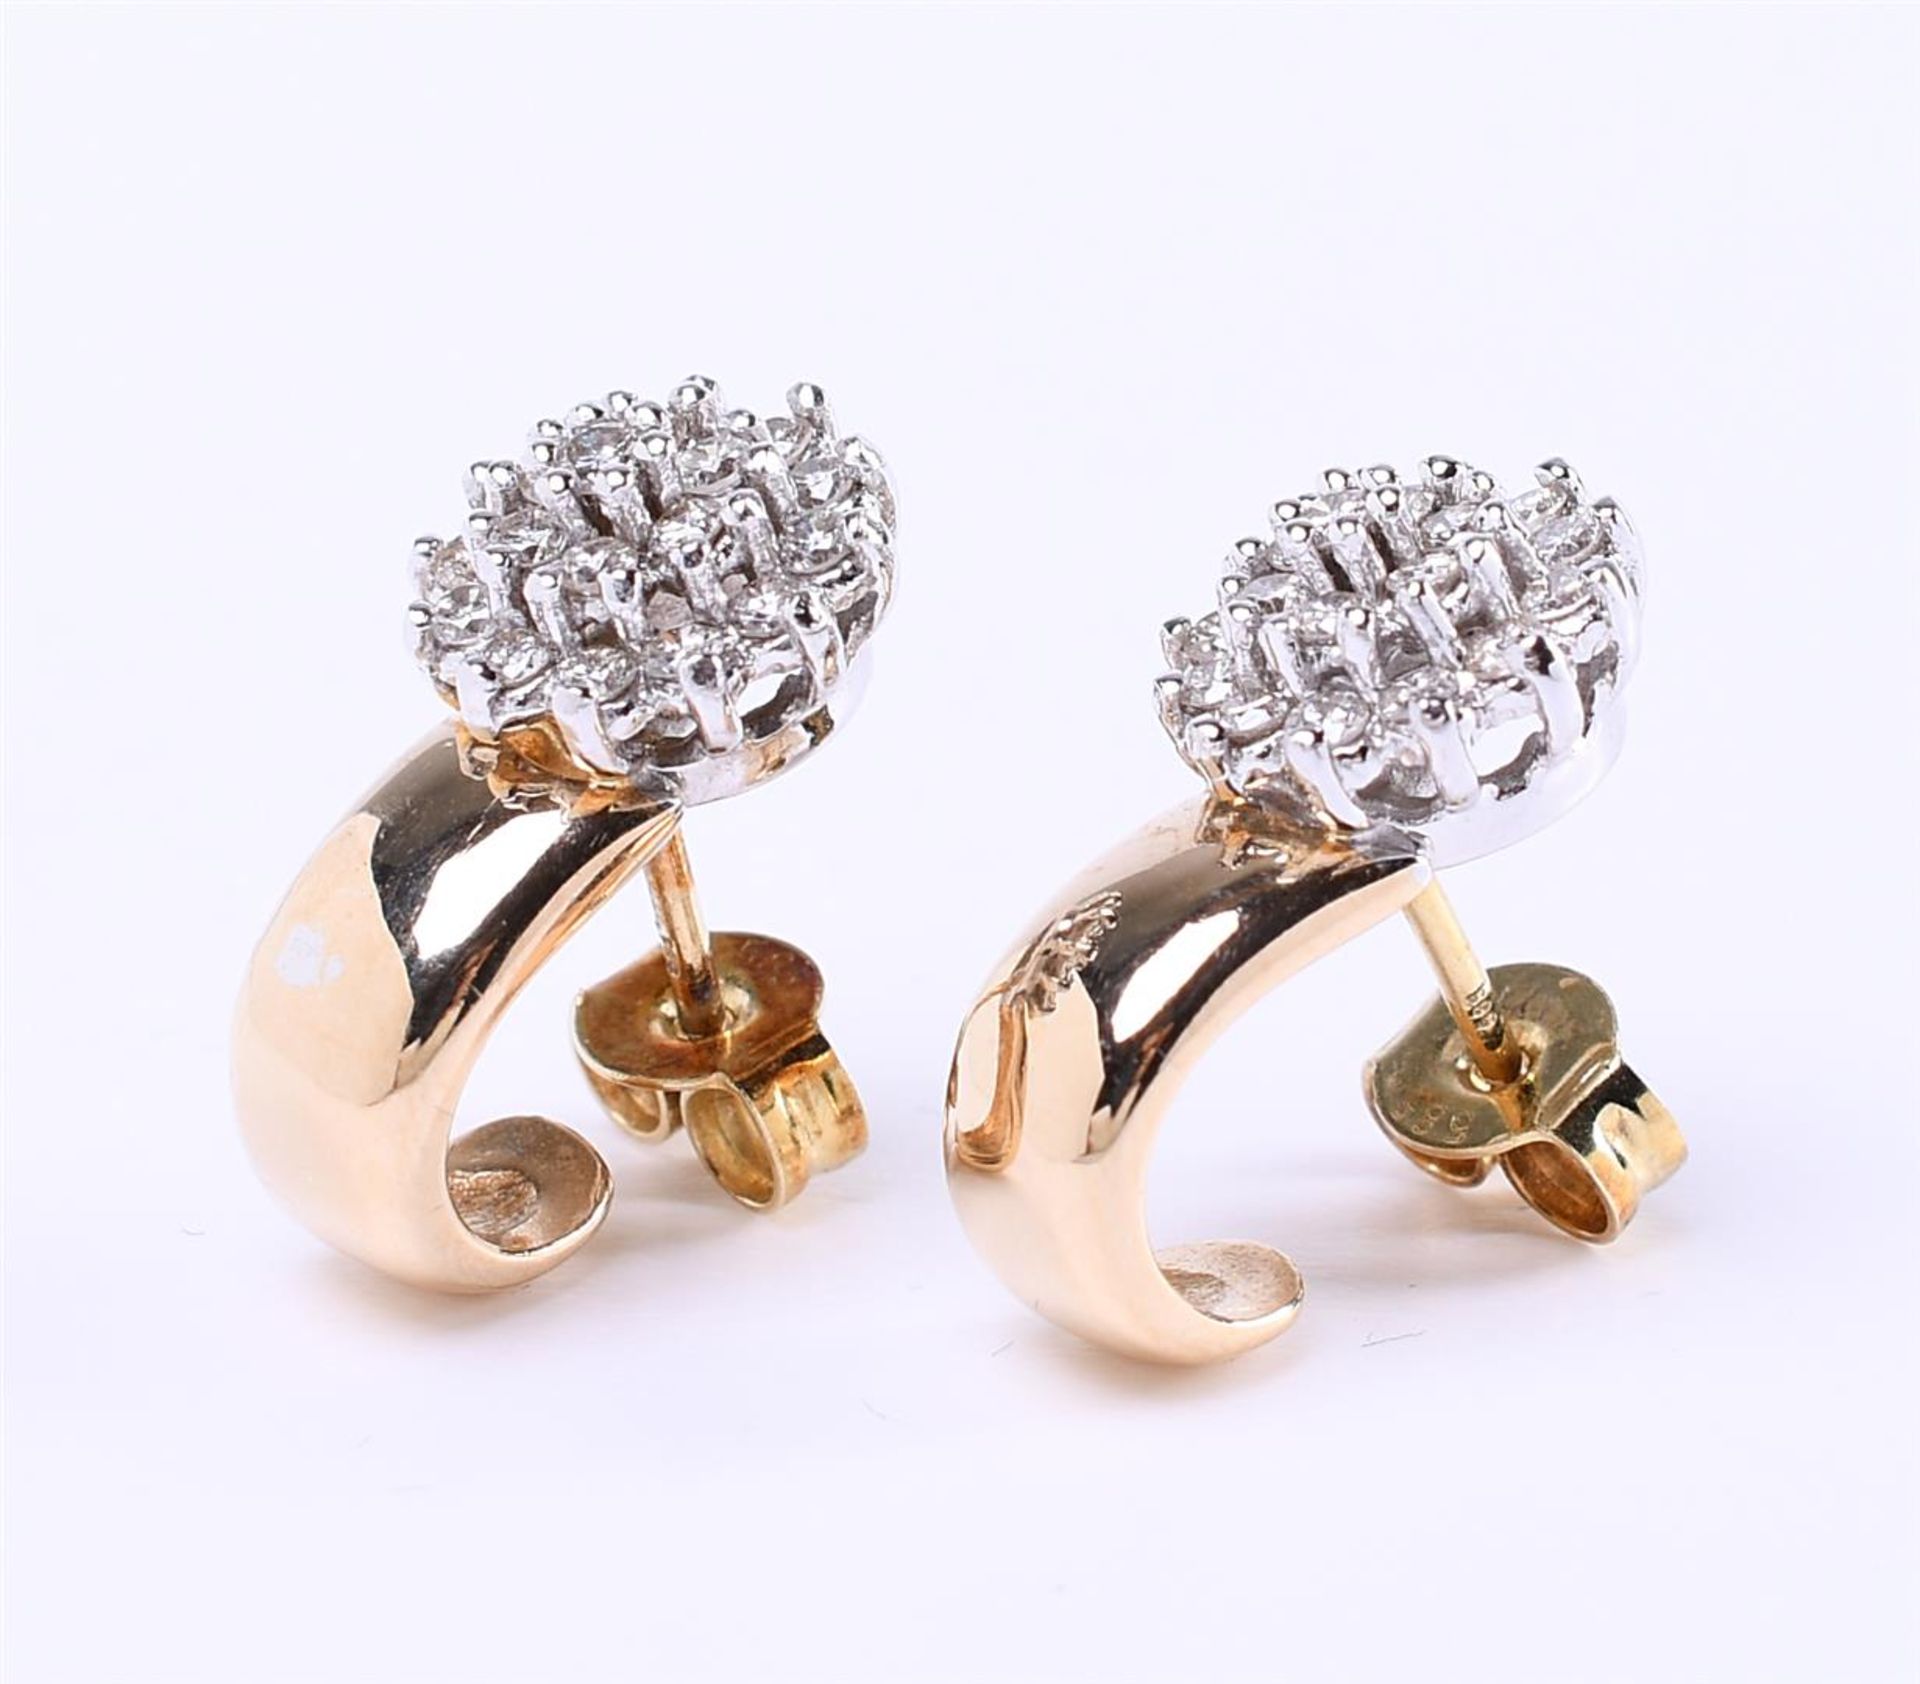 14 carat bicolor gold ladies' cluster earrings, the diamonds are set in a white gold - Bild 2 aus 4